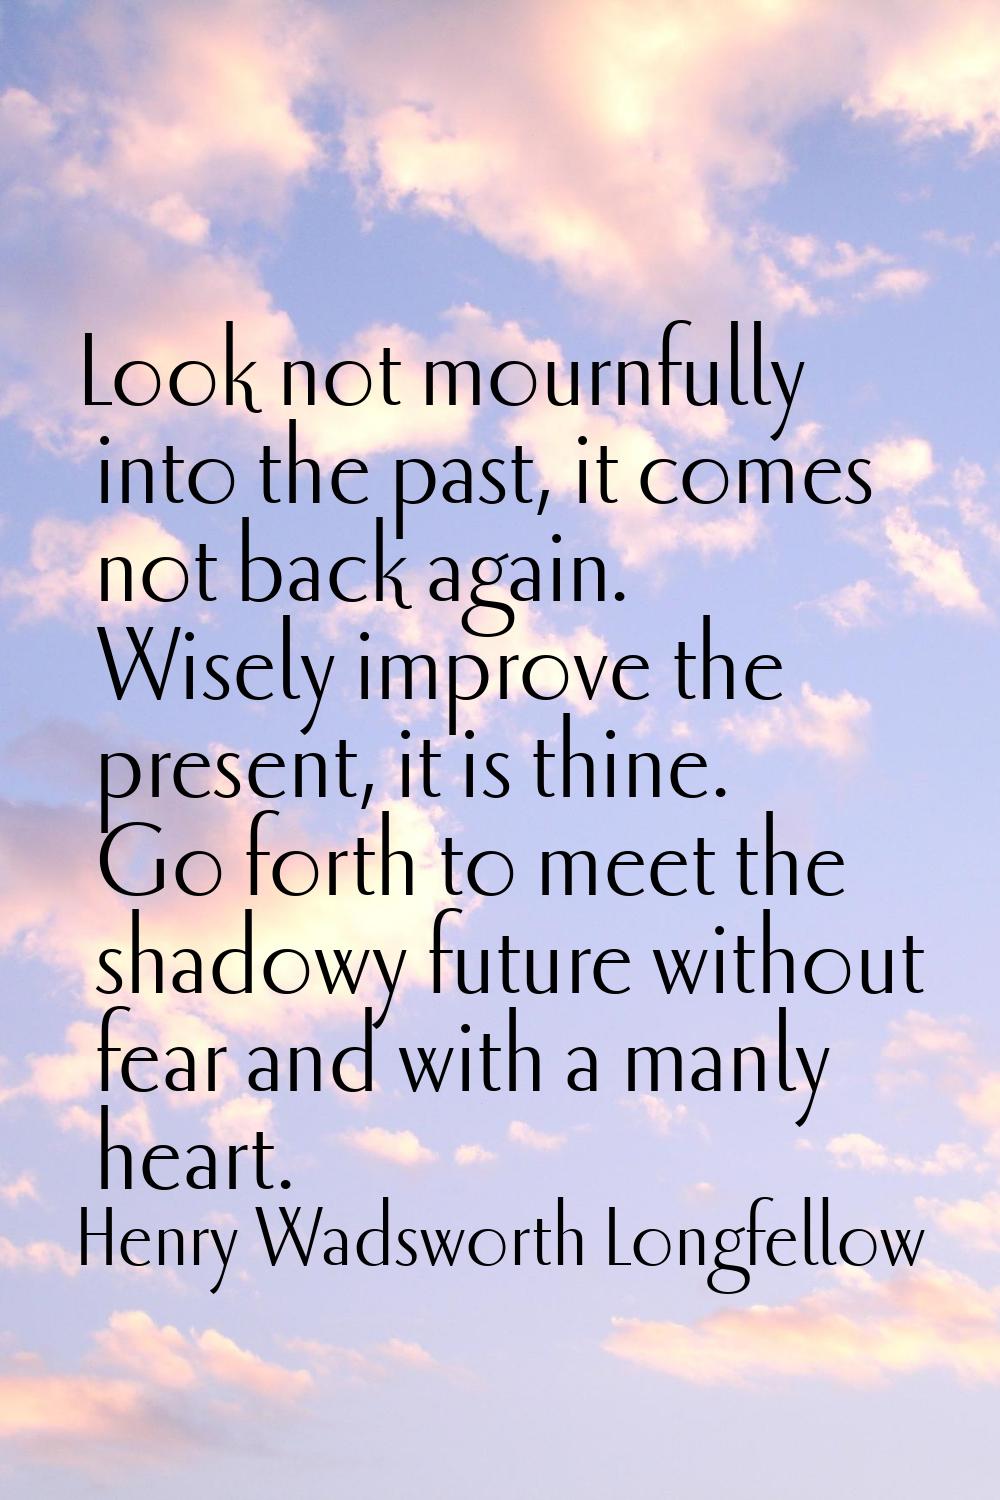 Look not mournfully into the past, it comes not back again. Wisely improve the present, it is thine